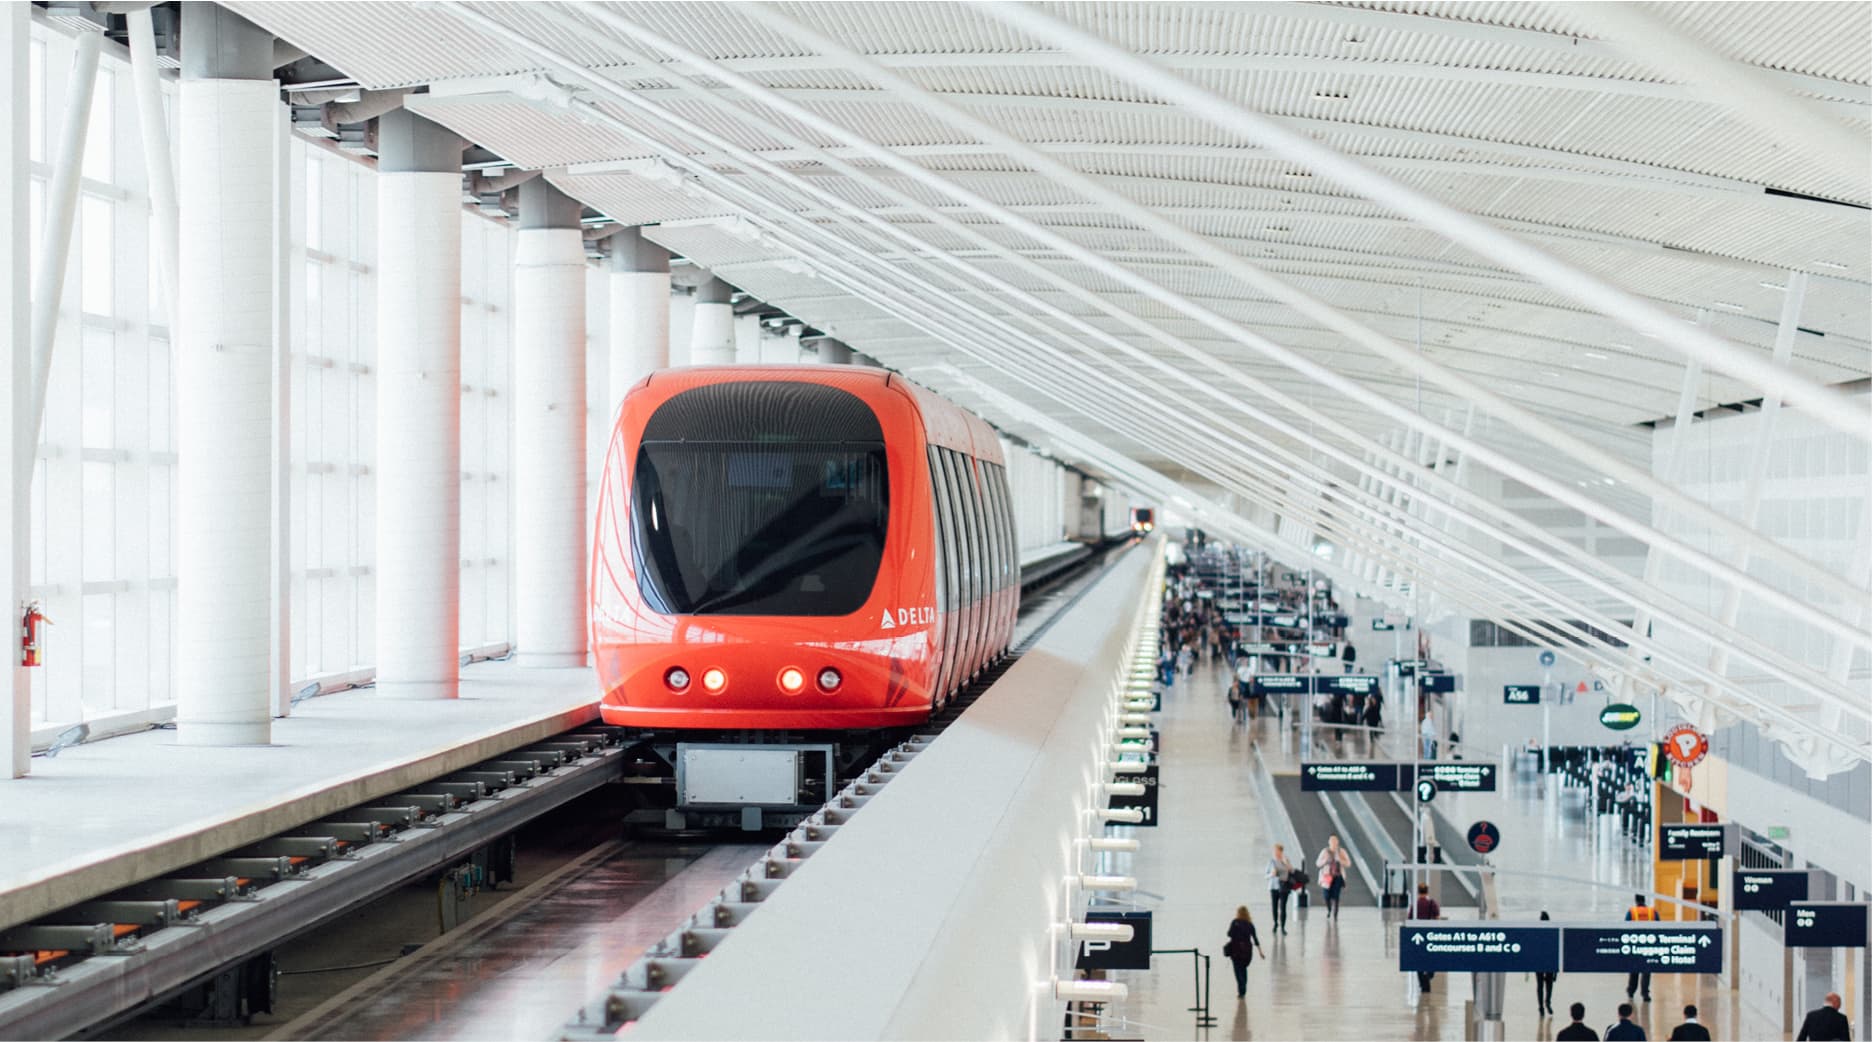 NETINERA subsidiary awarded contract for Central Germany S-Bahn network: Addleshaw Goddard represents Länderbahn in procurement process